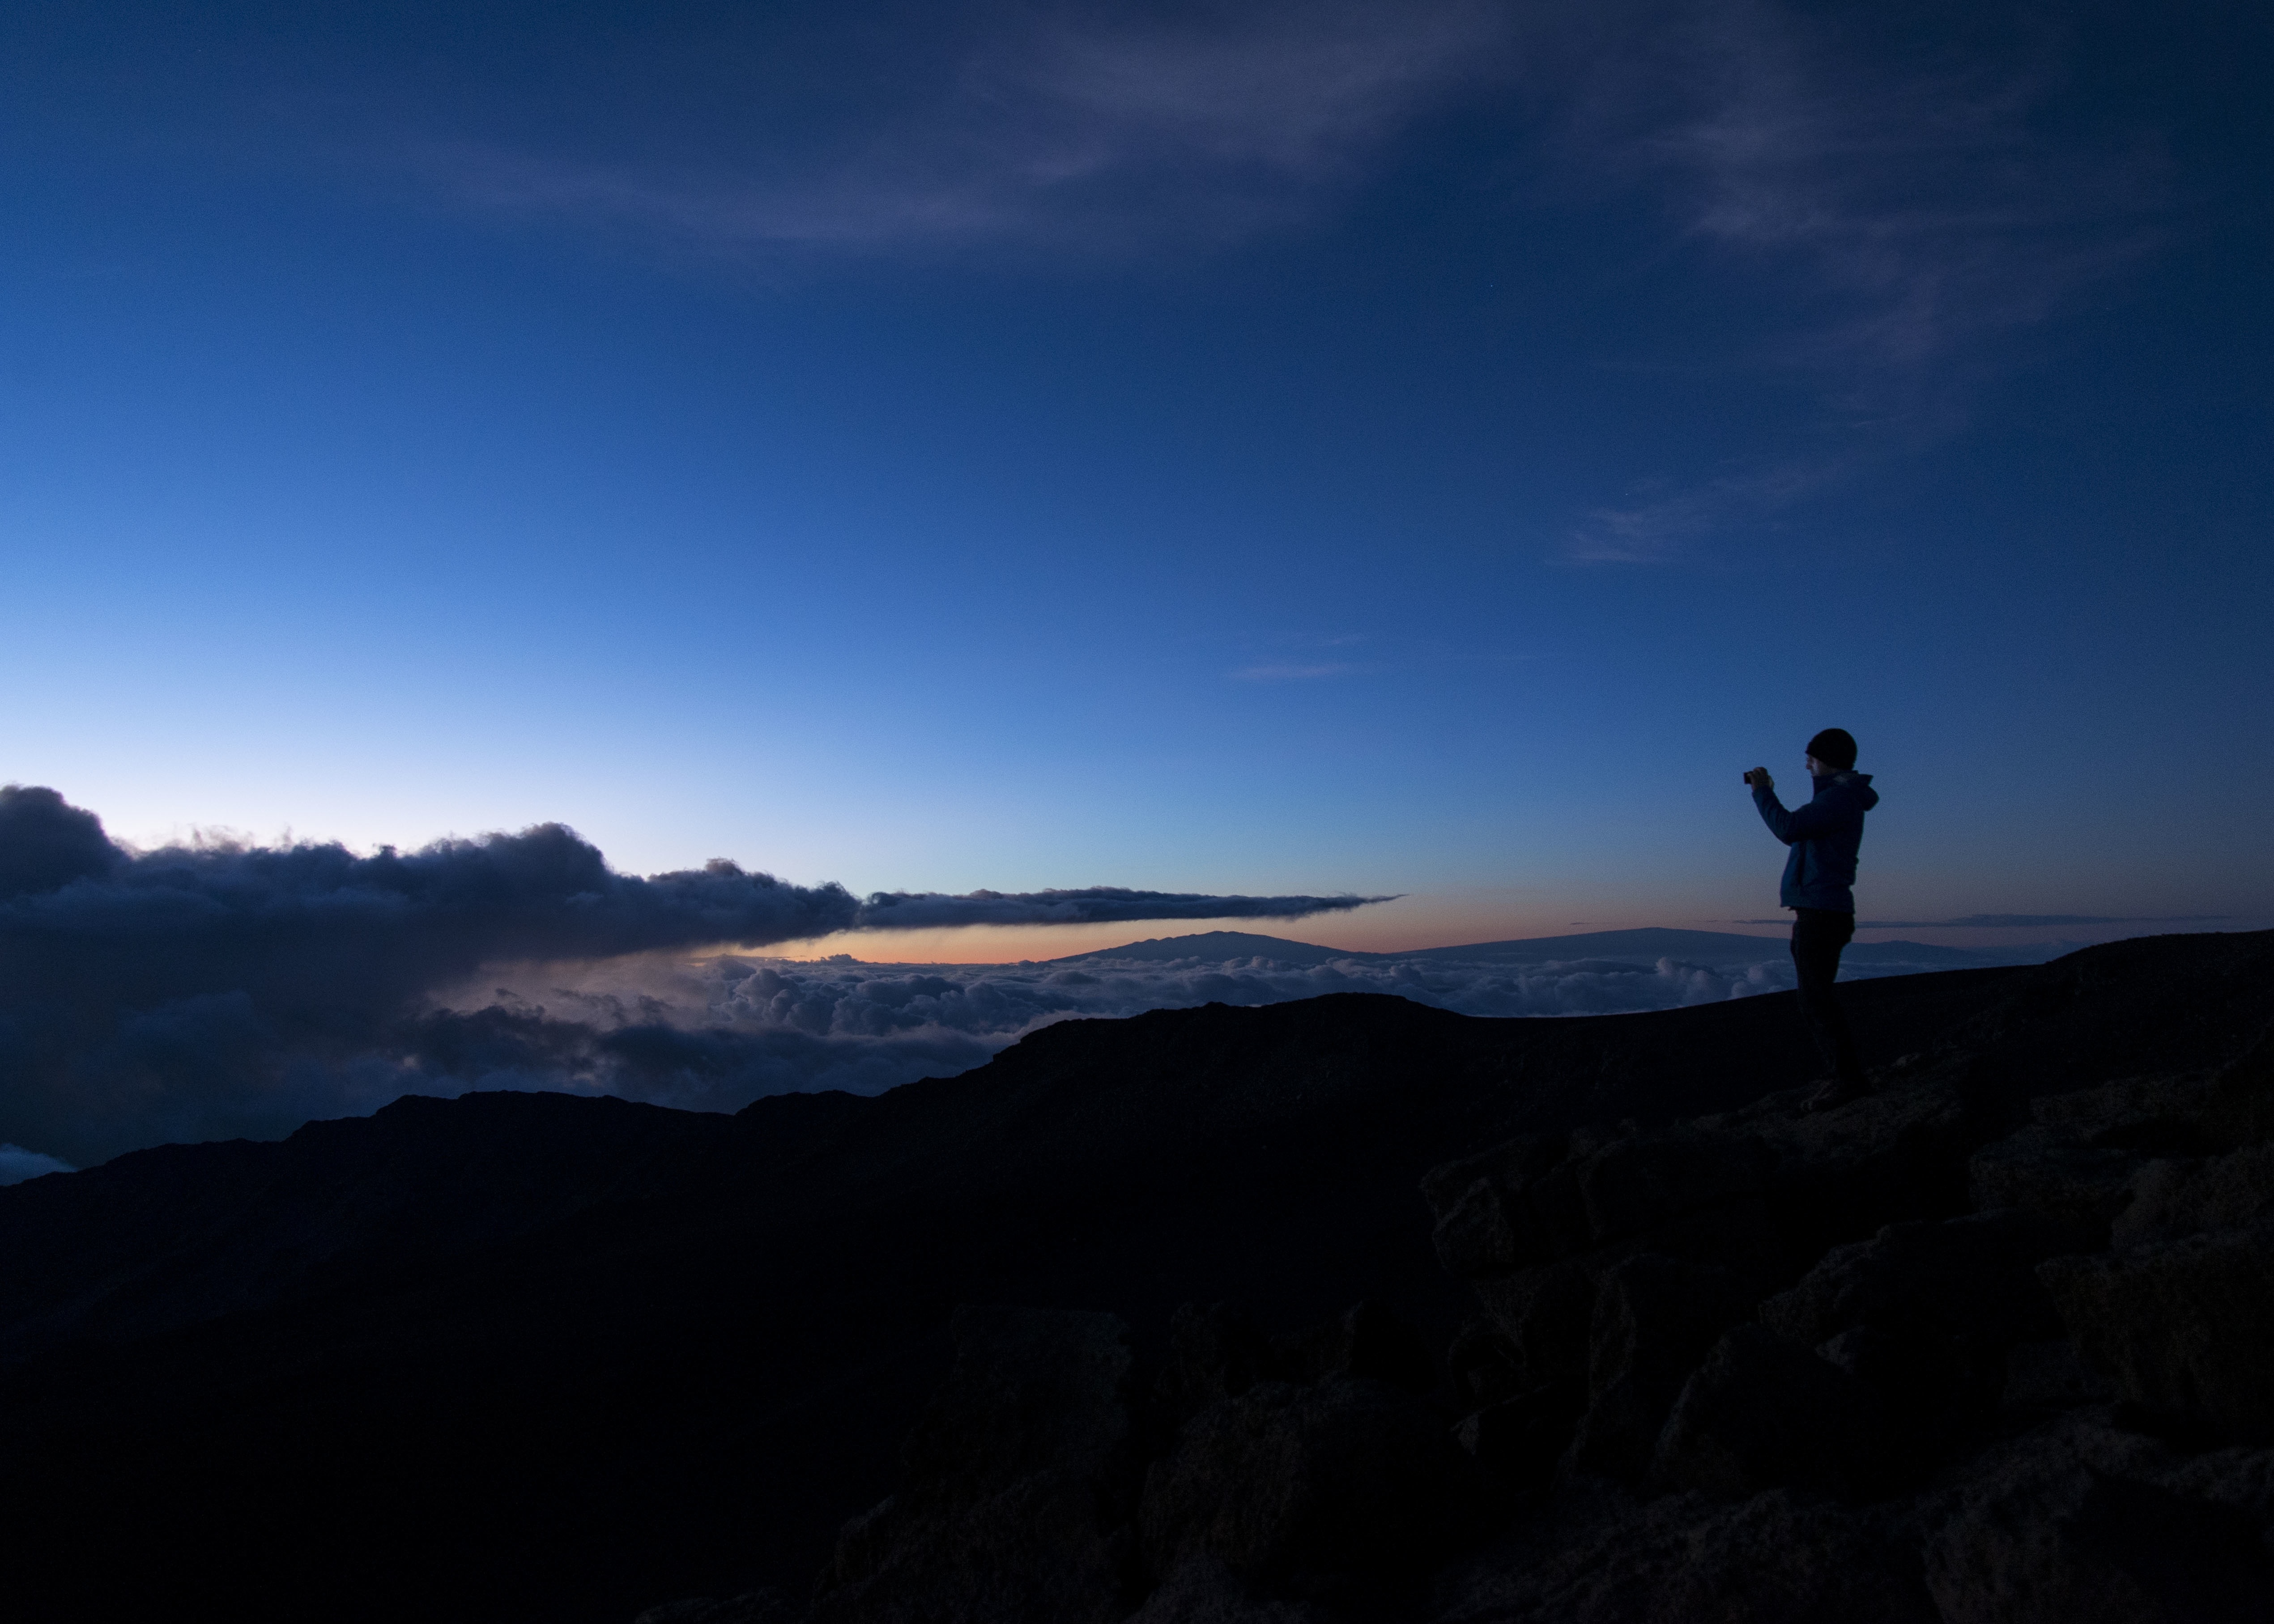 silhouette of person on muntains peak during night time